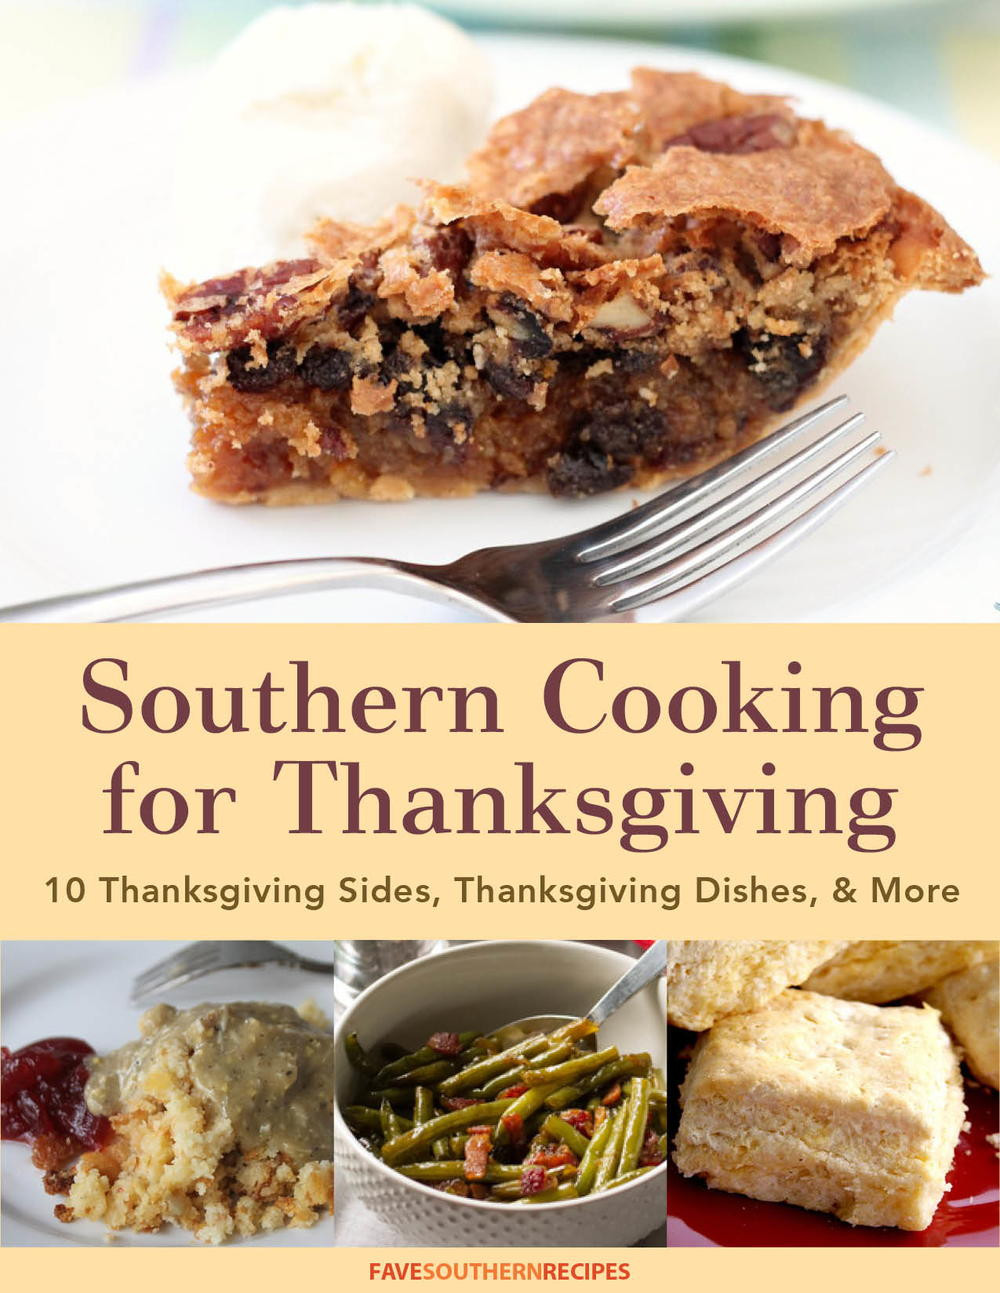 Southern Thanksgiving Desserts
 Southern Cooking for Thanksgiving 10 Thanksgiving Sides